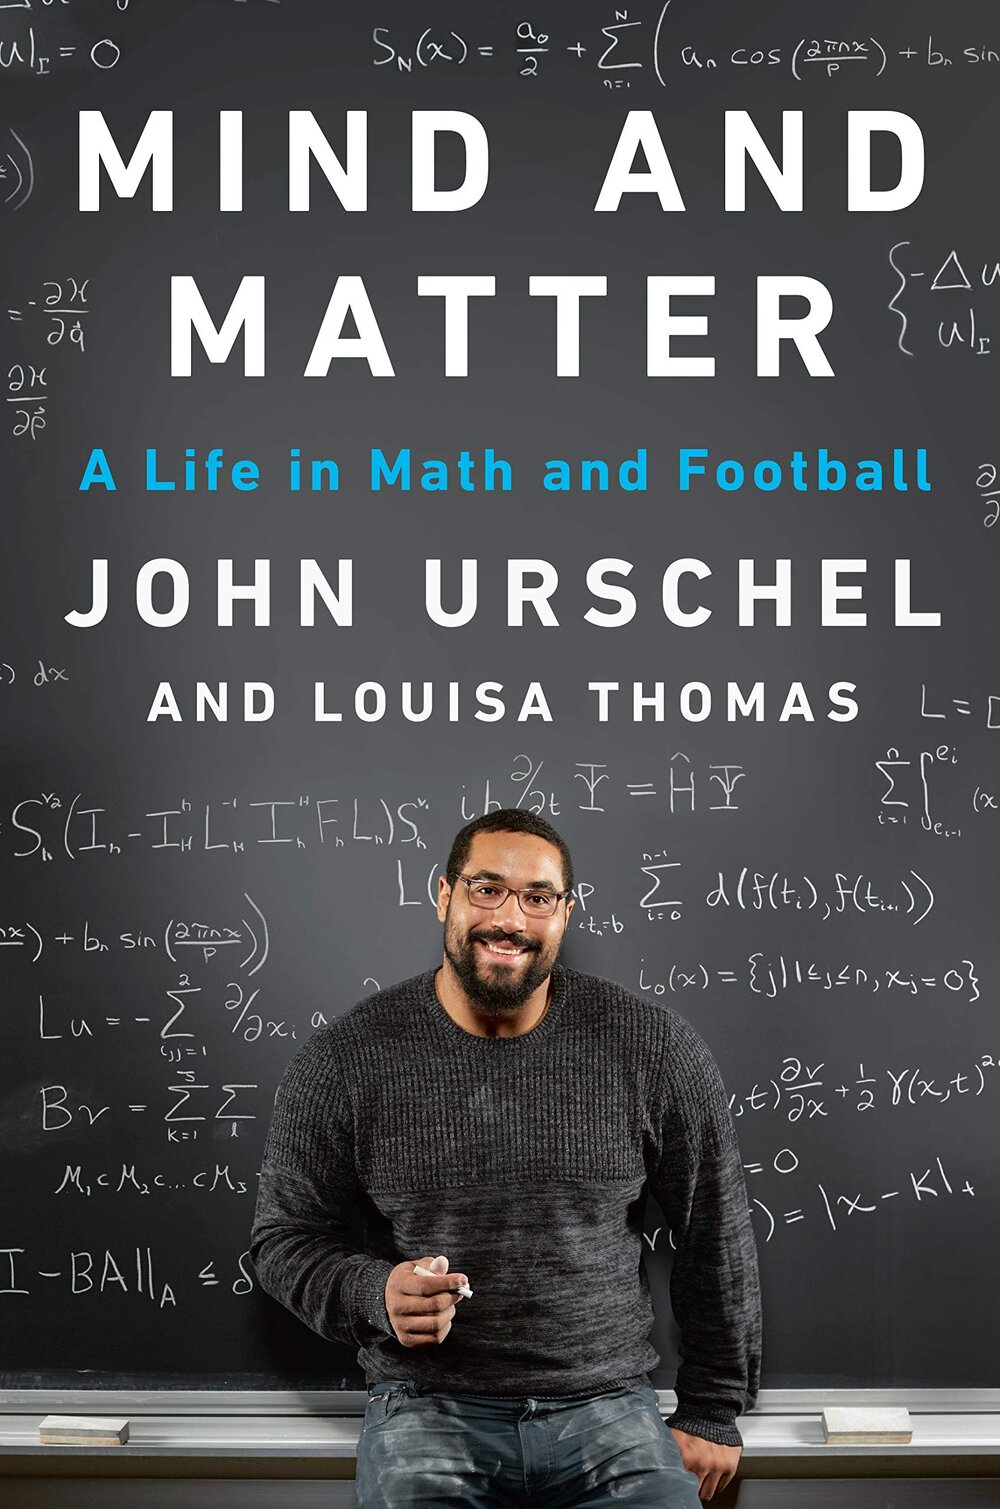 Mind and Matter: A Life in Math and Football by John Urschel and Louisa Thomas